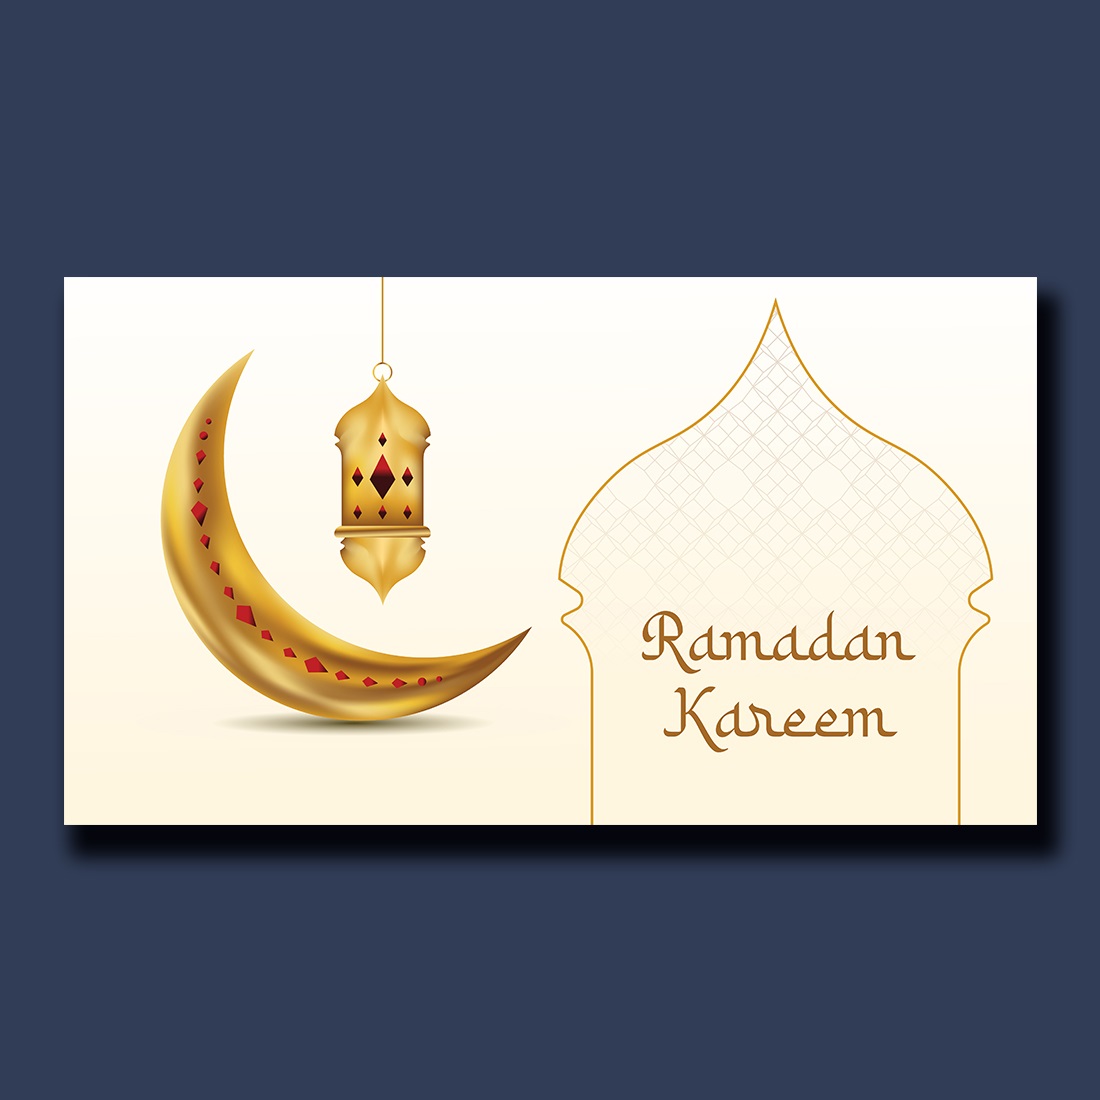 Elegant Islamic Design for Ramadan Celebrations with 3D Moon, Stars, and Lamps cover image.